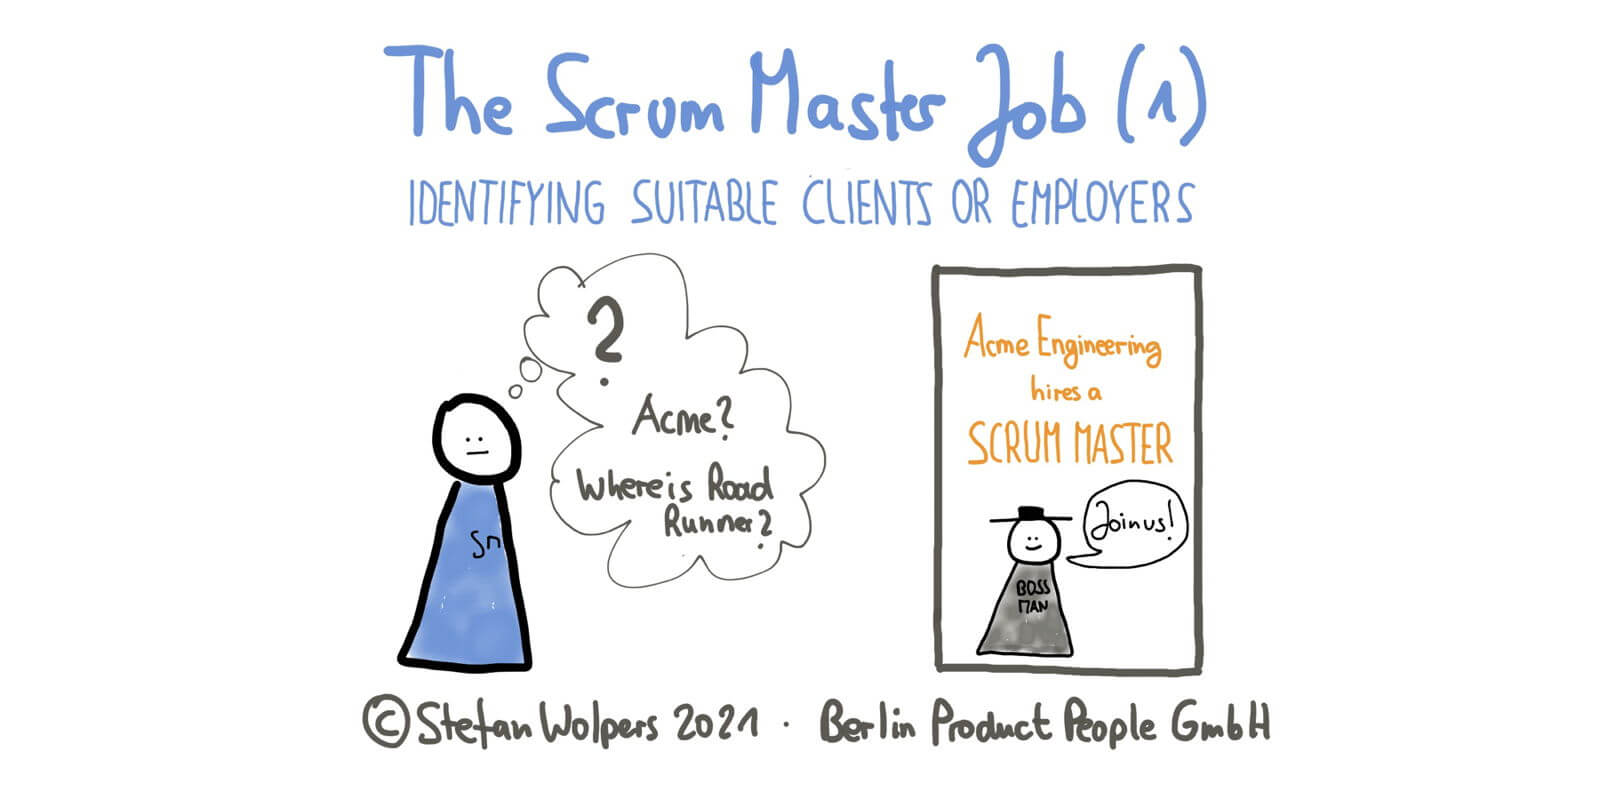 The Scrum Master Job (1): 4 Steps to Identify Suitable Employers or Clients — Berlin-Product-People GmbH